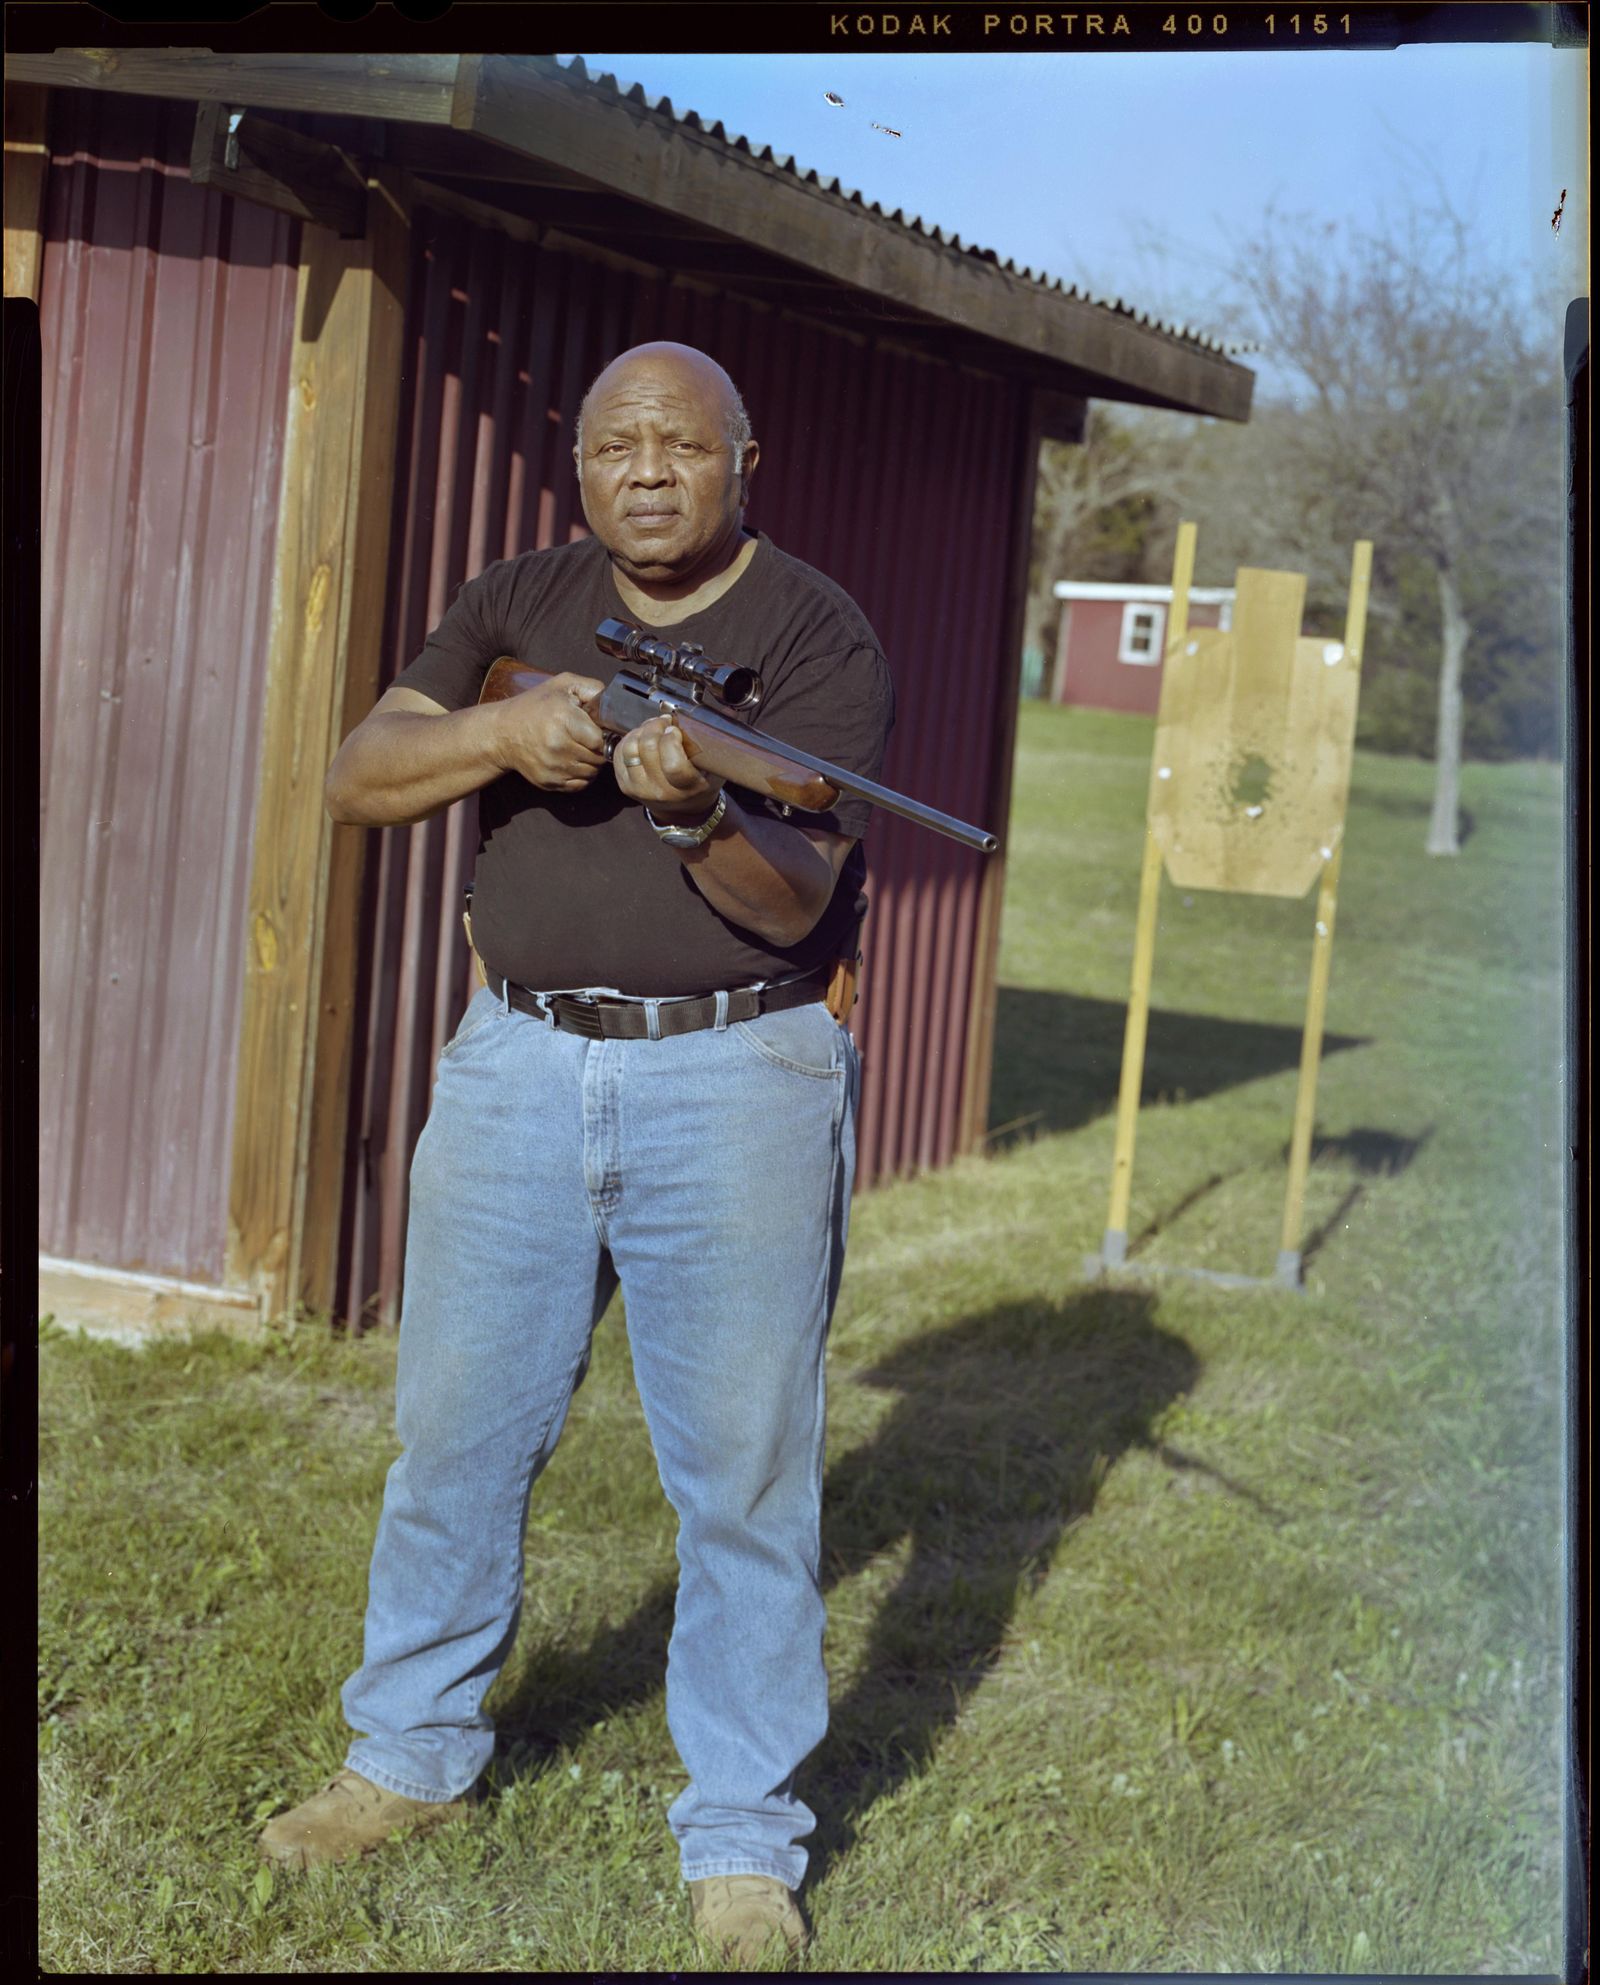 © Christian K. Lee - Image from the Armed Doesn't Mean Dangerous photography project